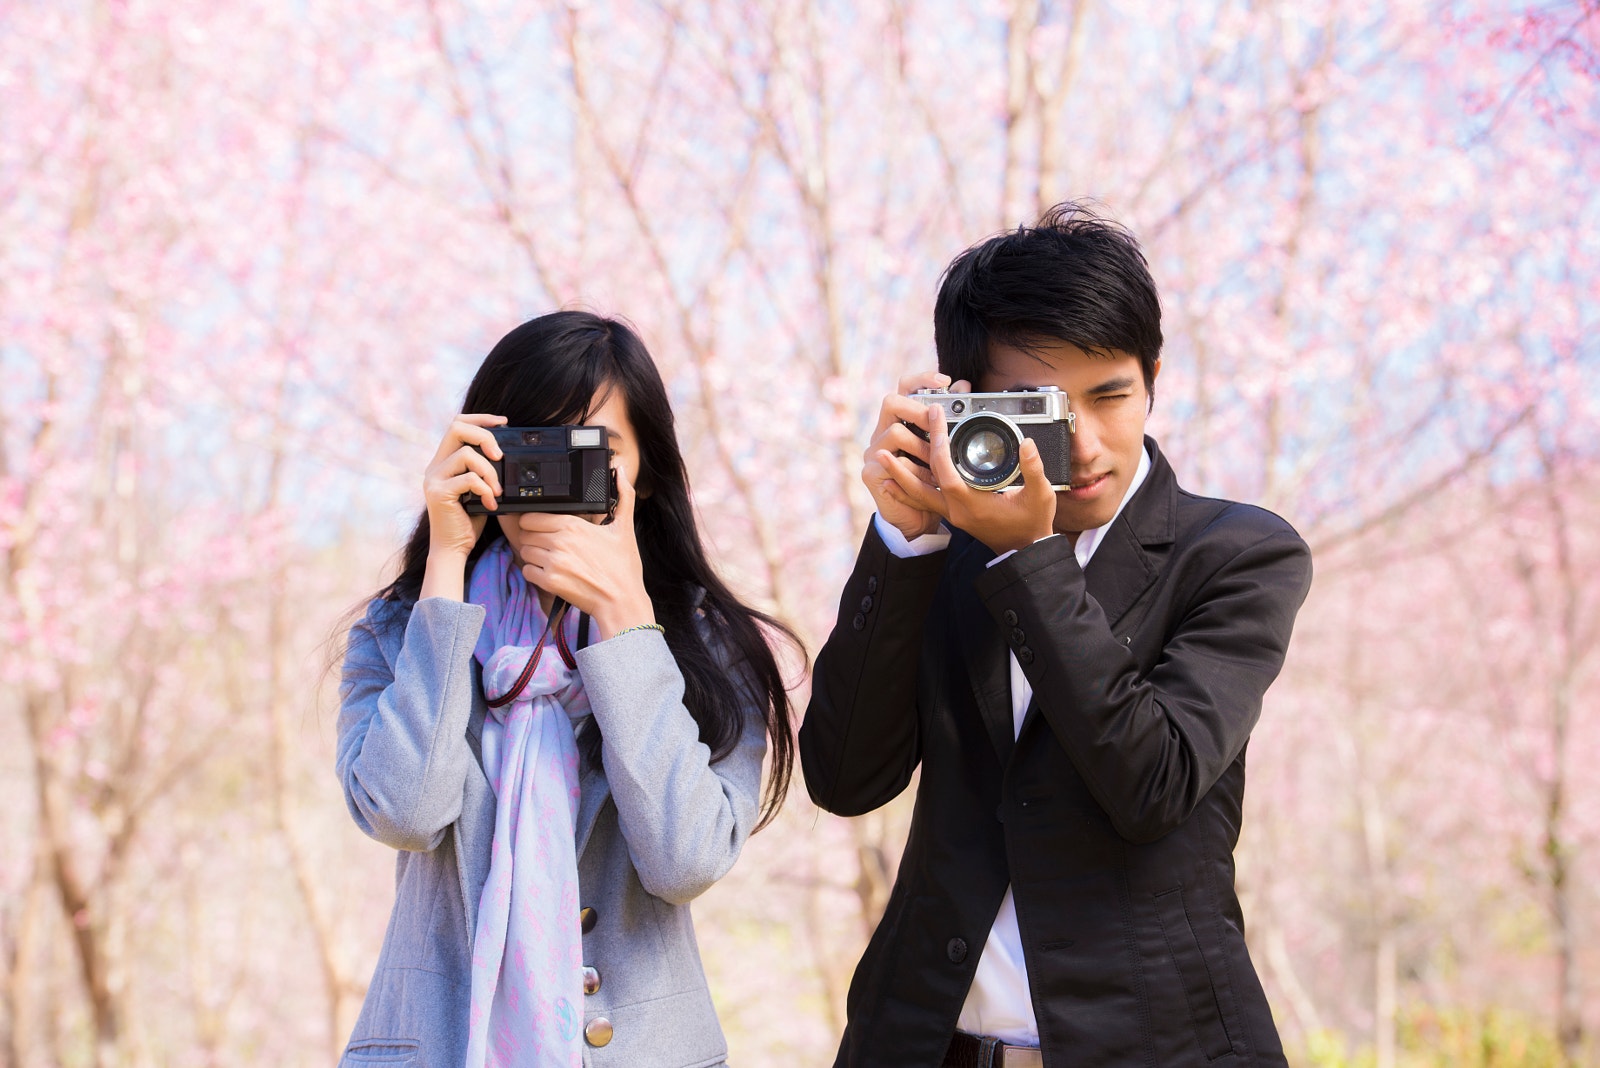 Three Ways to Find the Perfect Photos for Your Brand